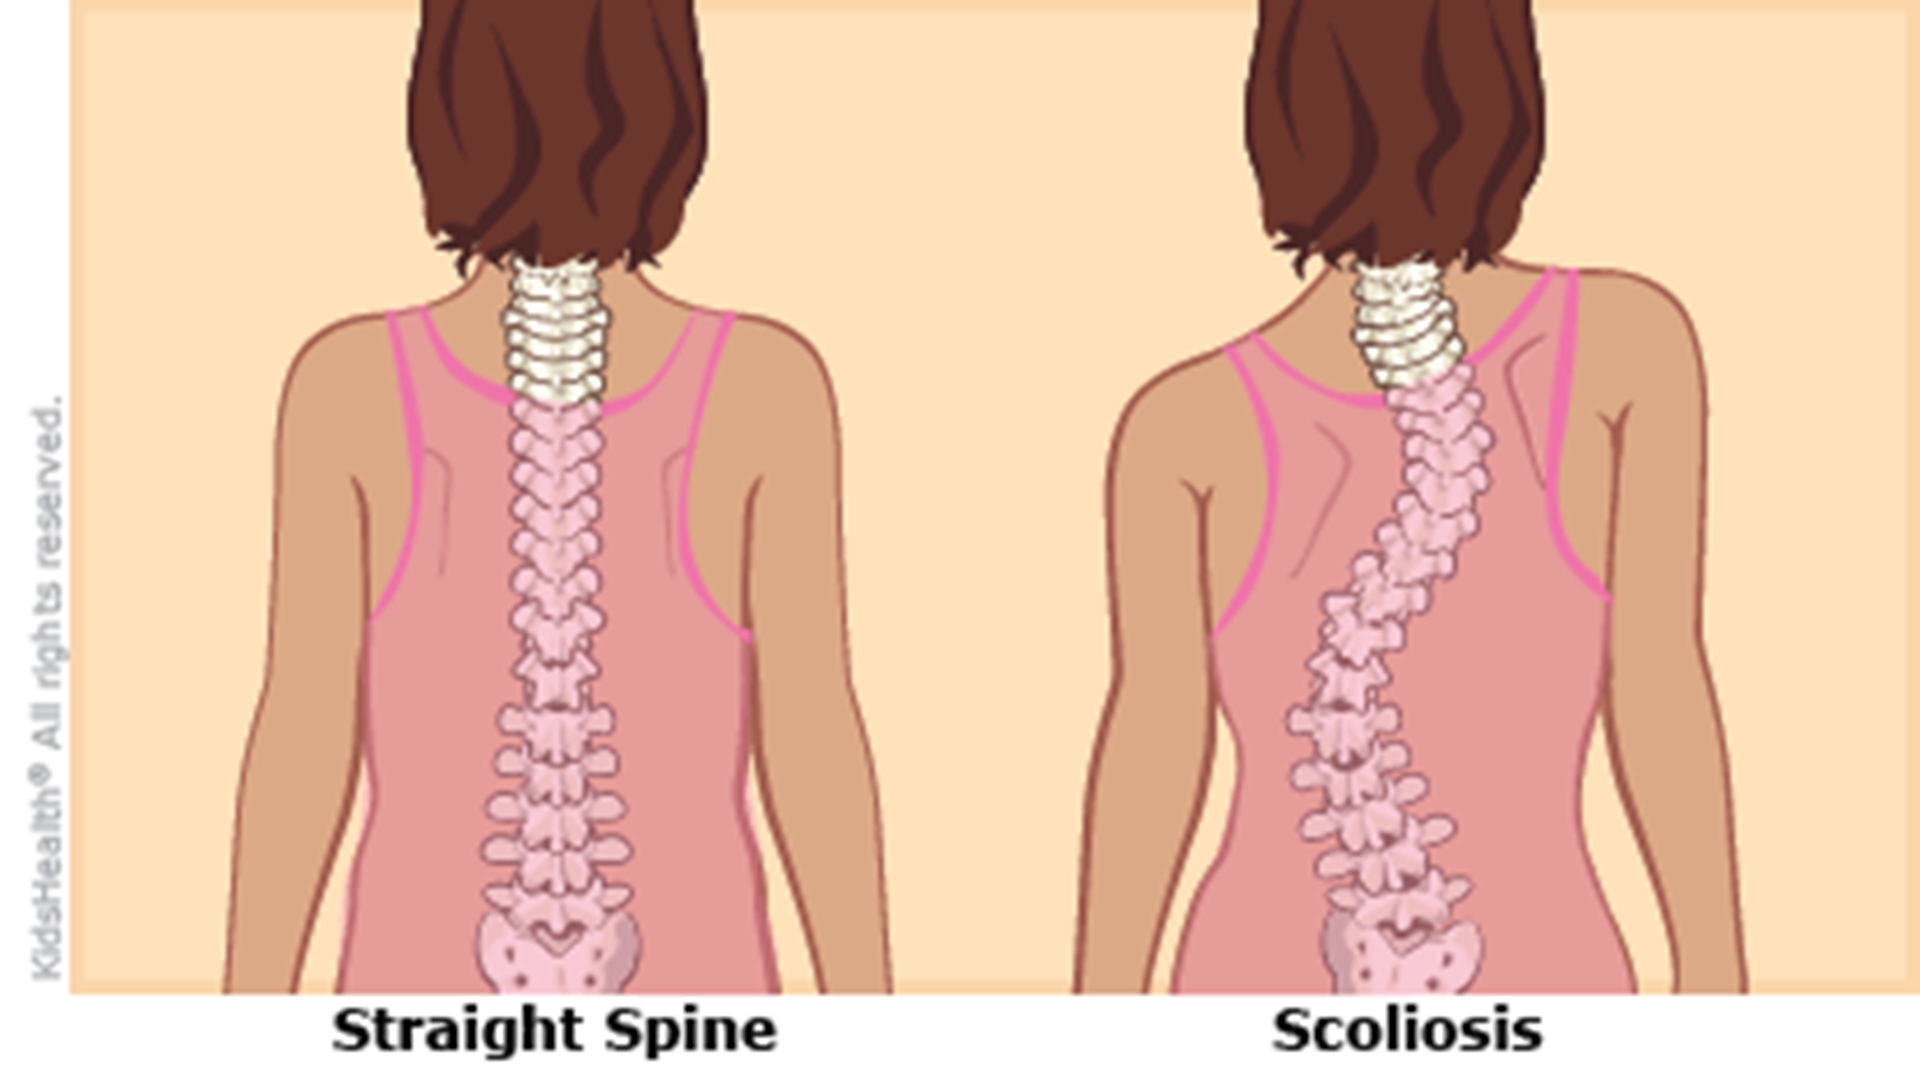 scoliosiscroppeda-415x233-enil-main.png